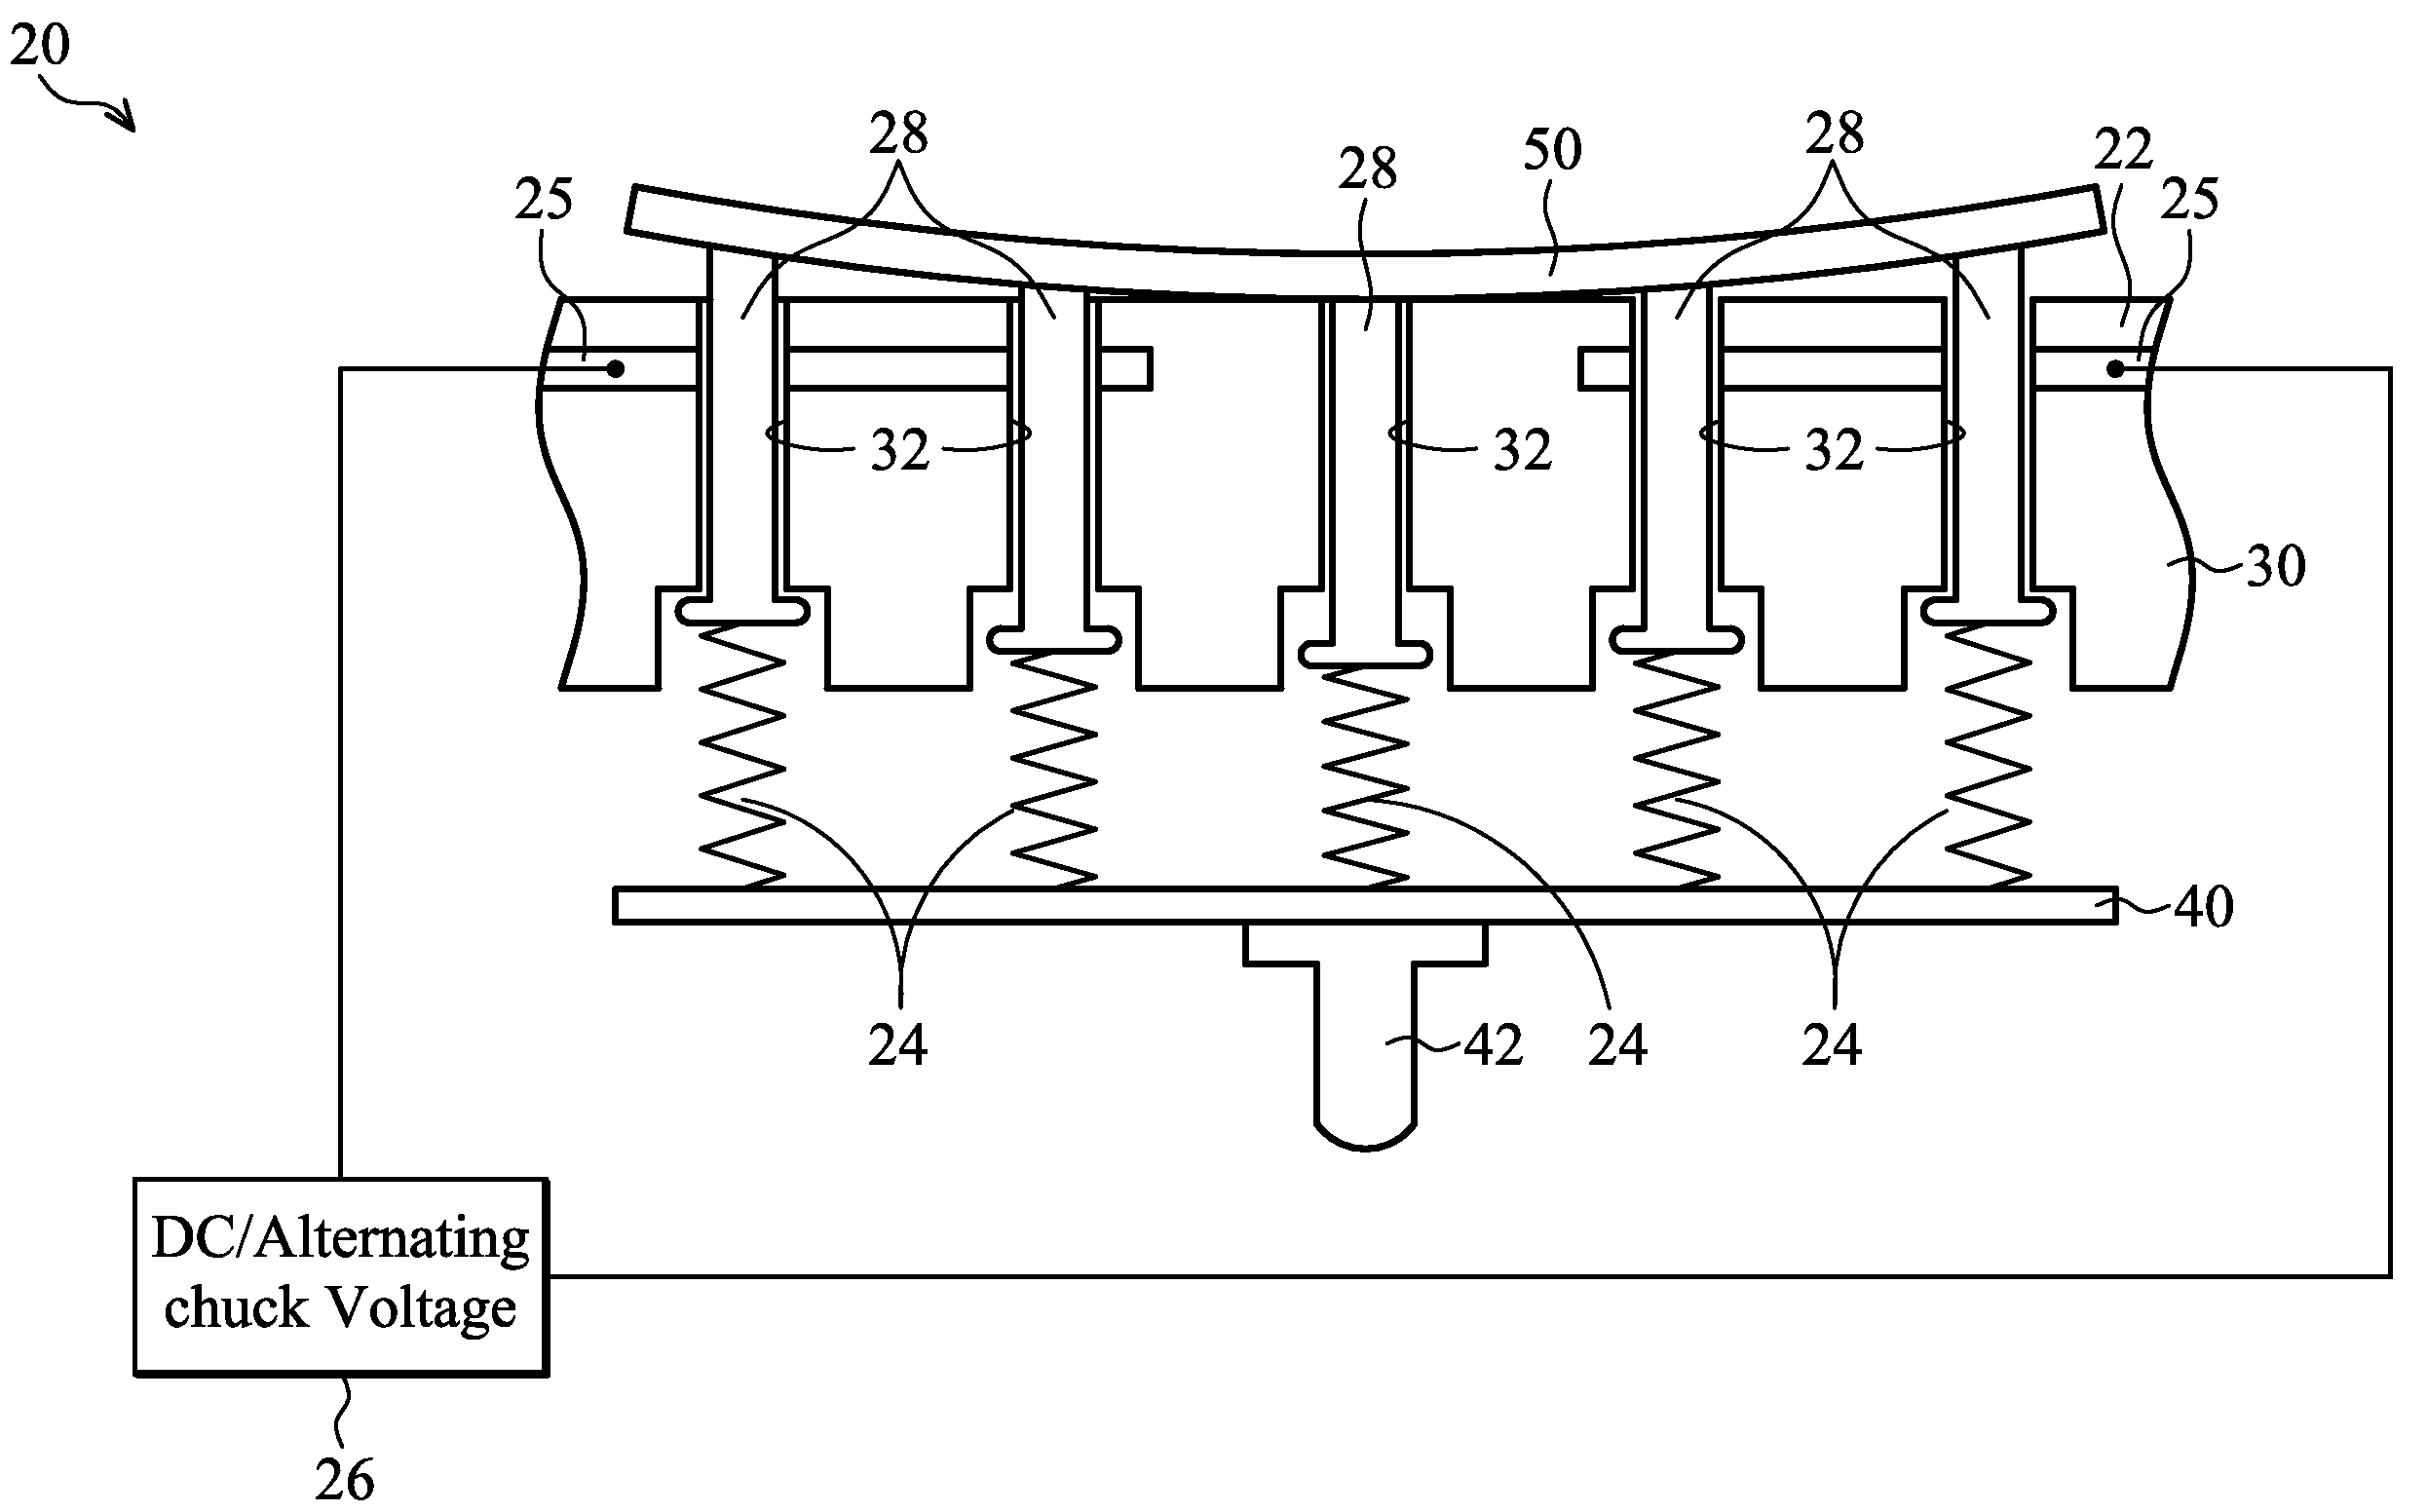 Apparatus for Holding Semiconductor Wafers